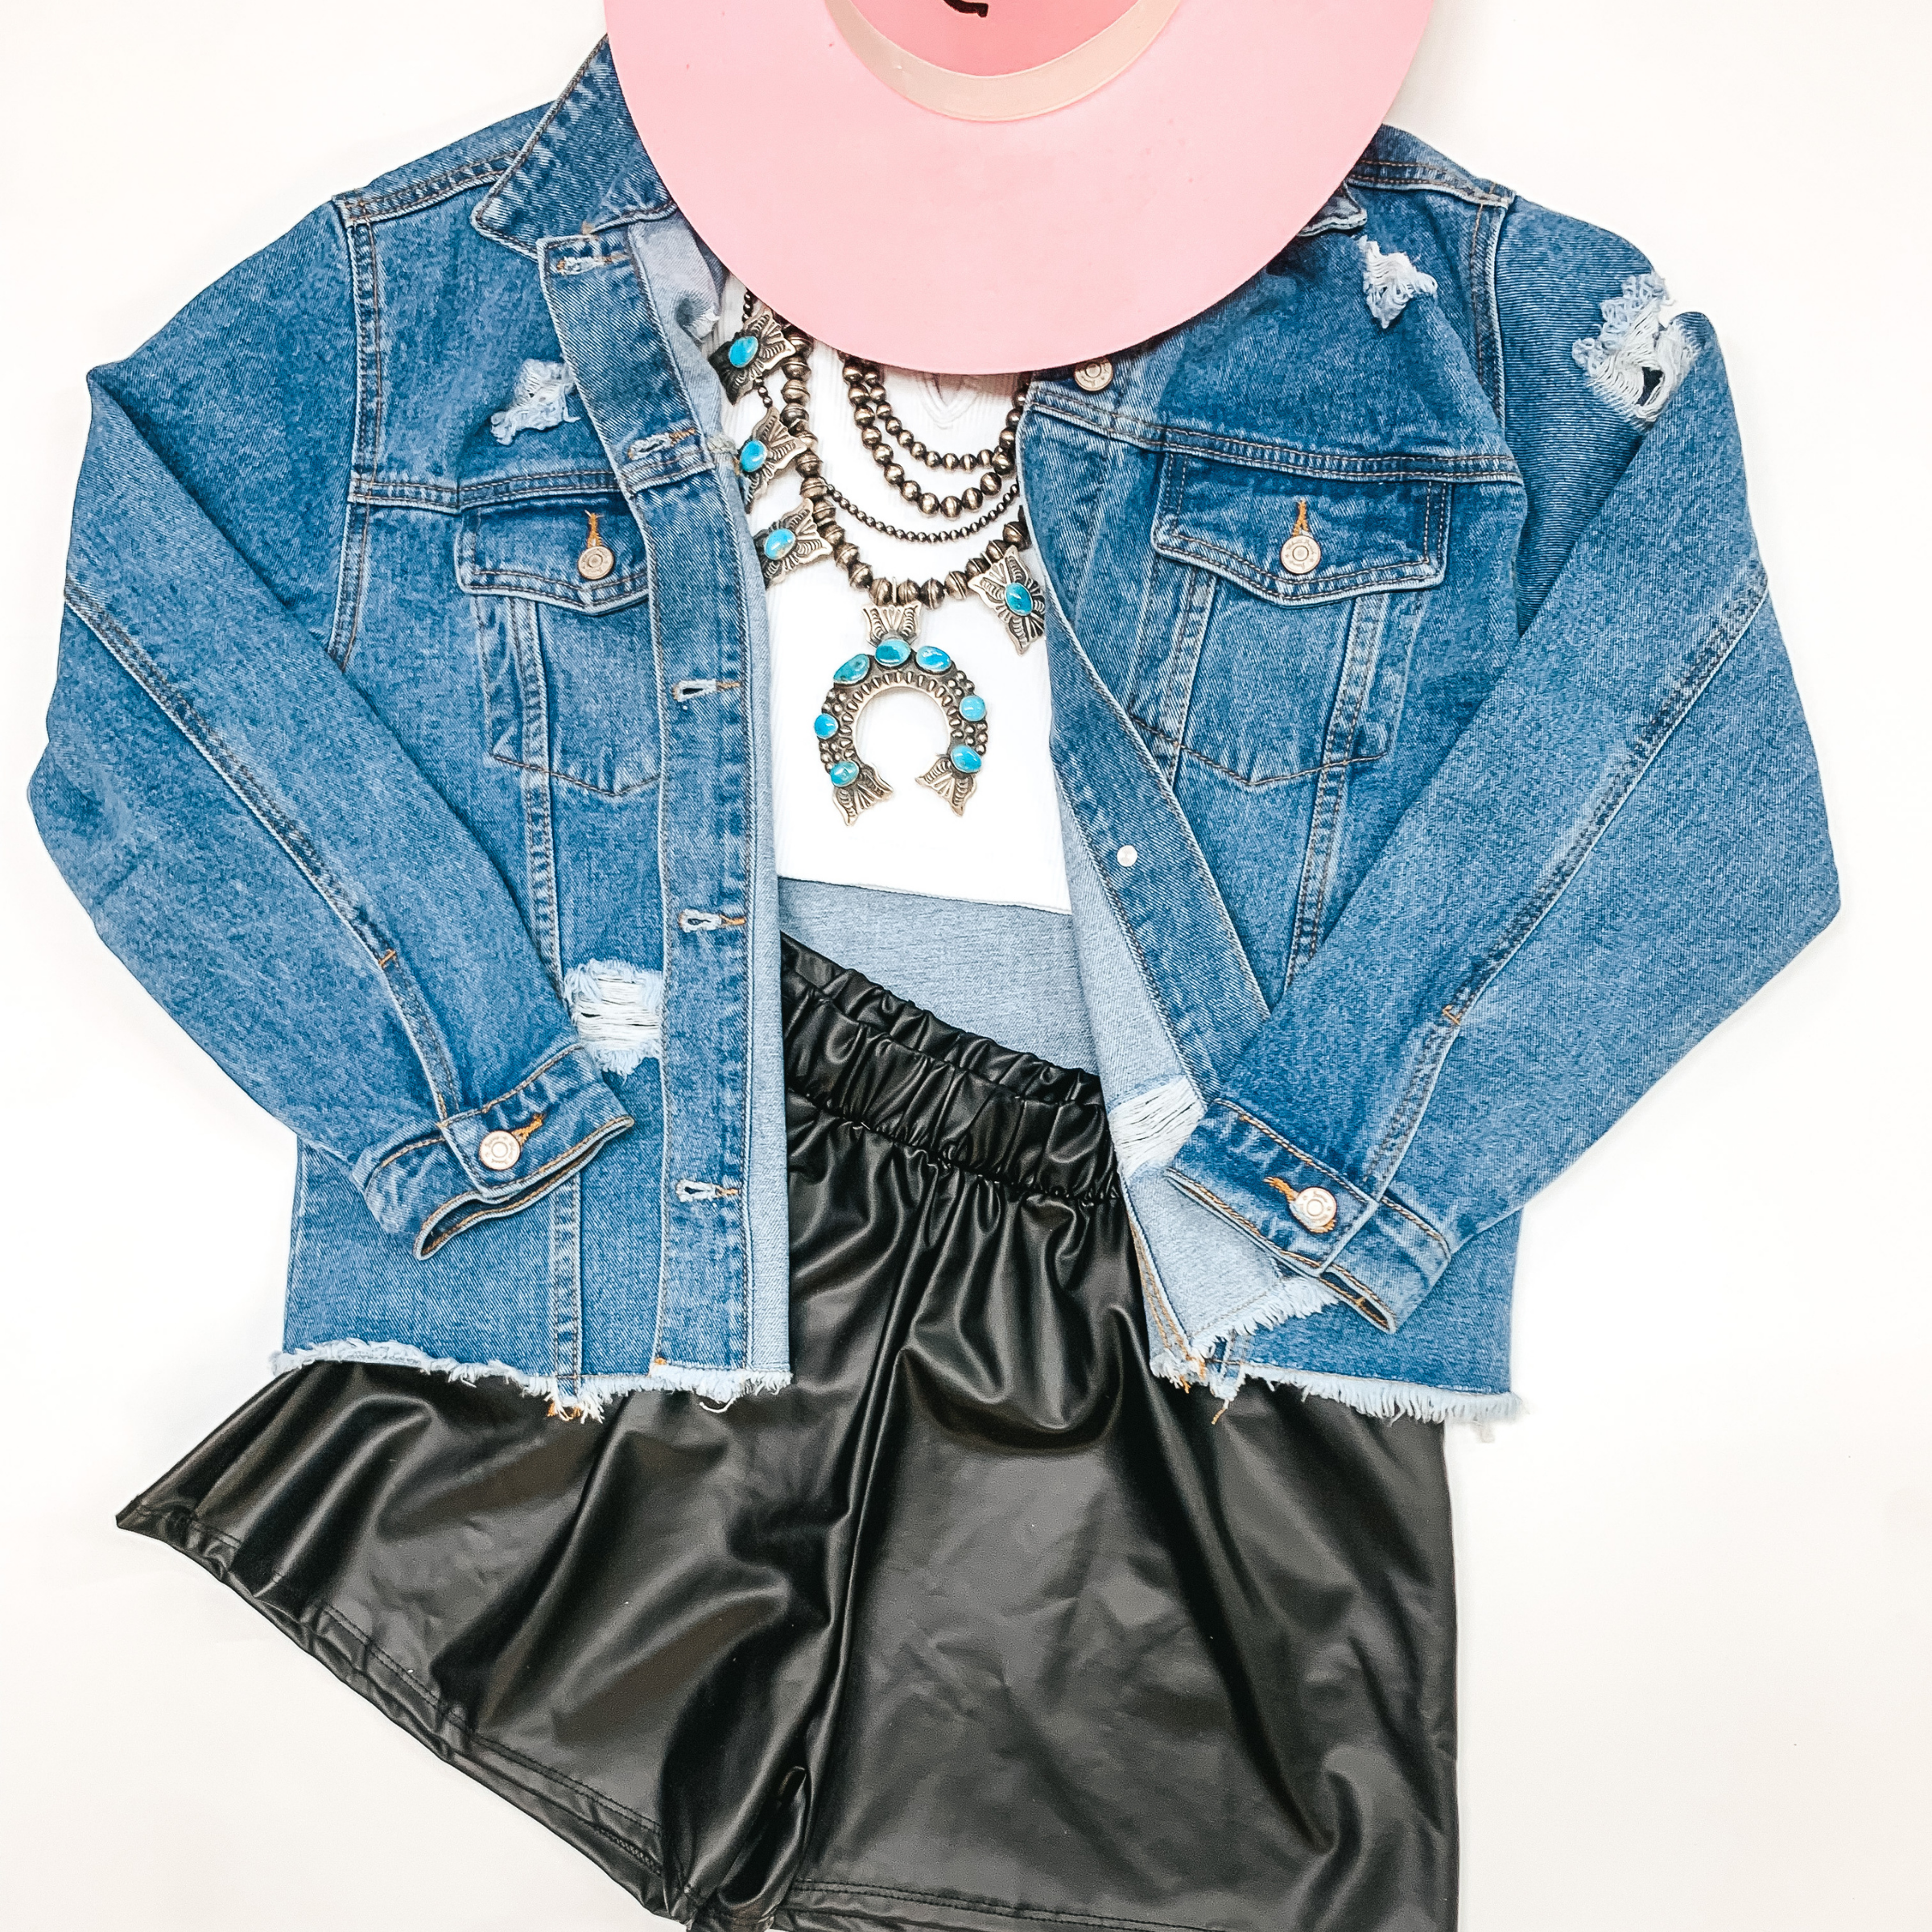 Chic Needs Button Up Cropped Denim Jacket in Medium Wash - Giddy Up Glamour Boutique